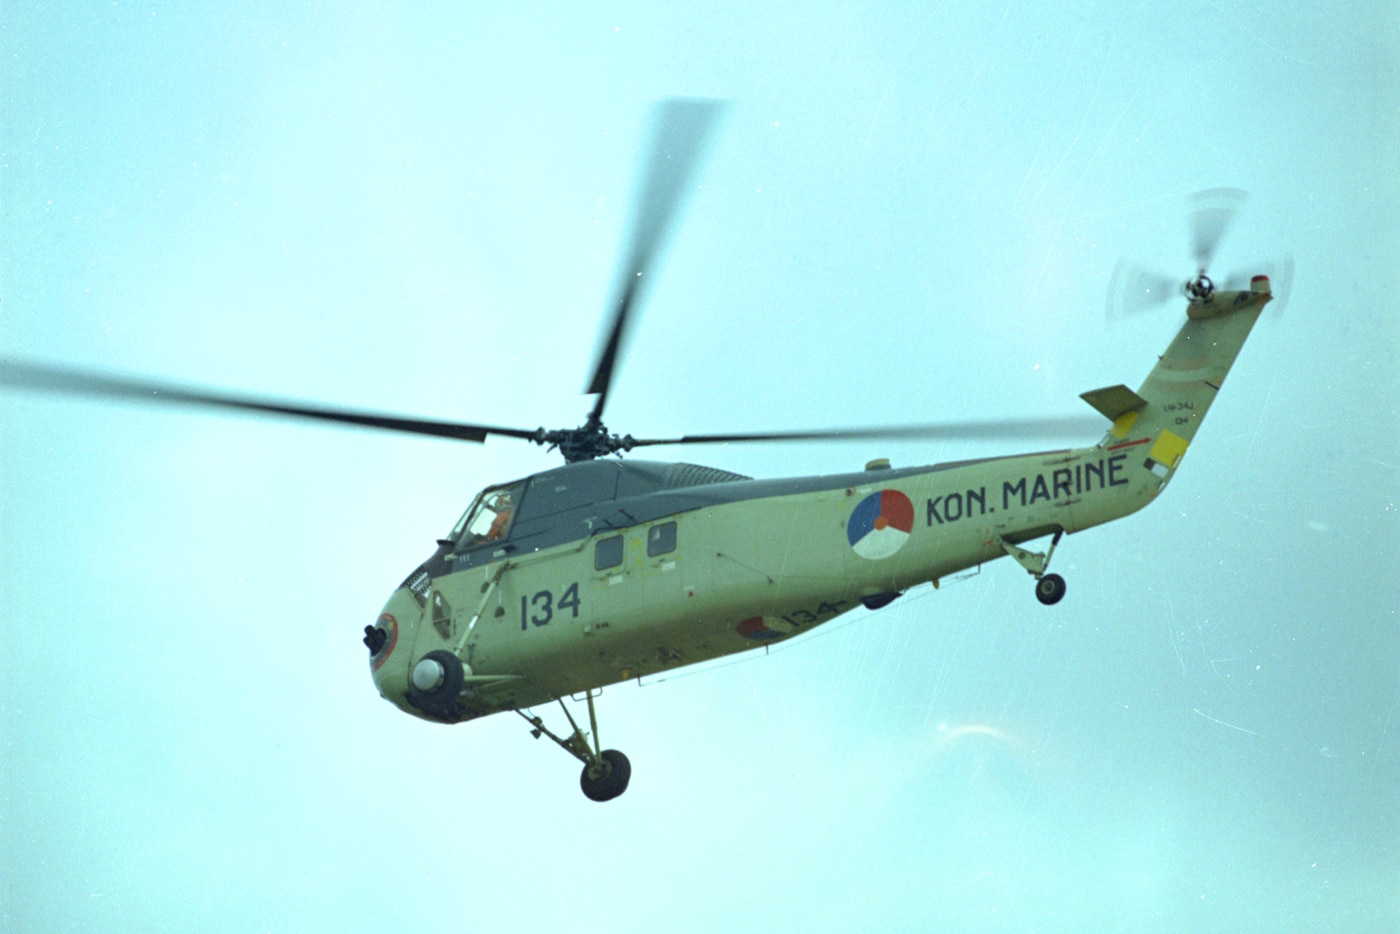 A Royal Netherland Marine H-34 is shown in this color photograph. The H-34 was the last piston-engined helicopter used in combat operations by the US military.